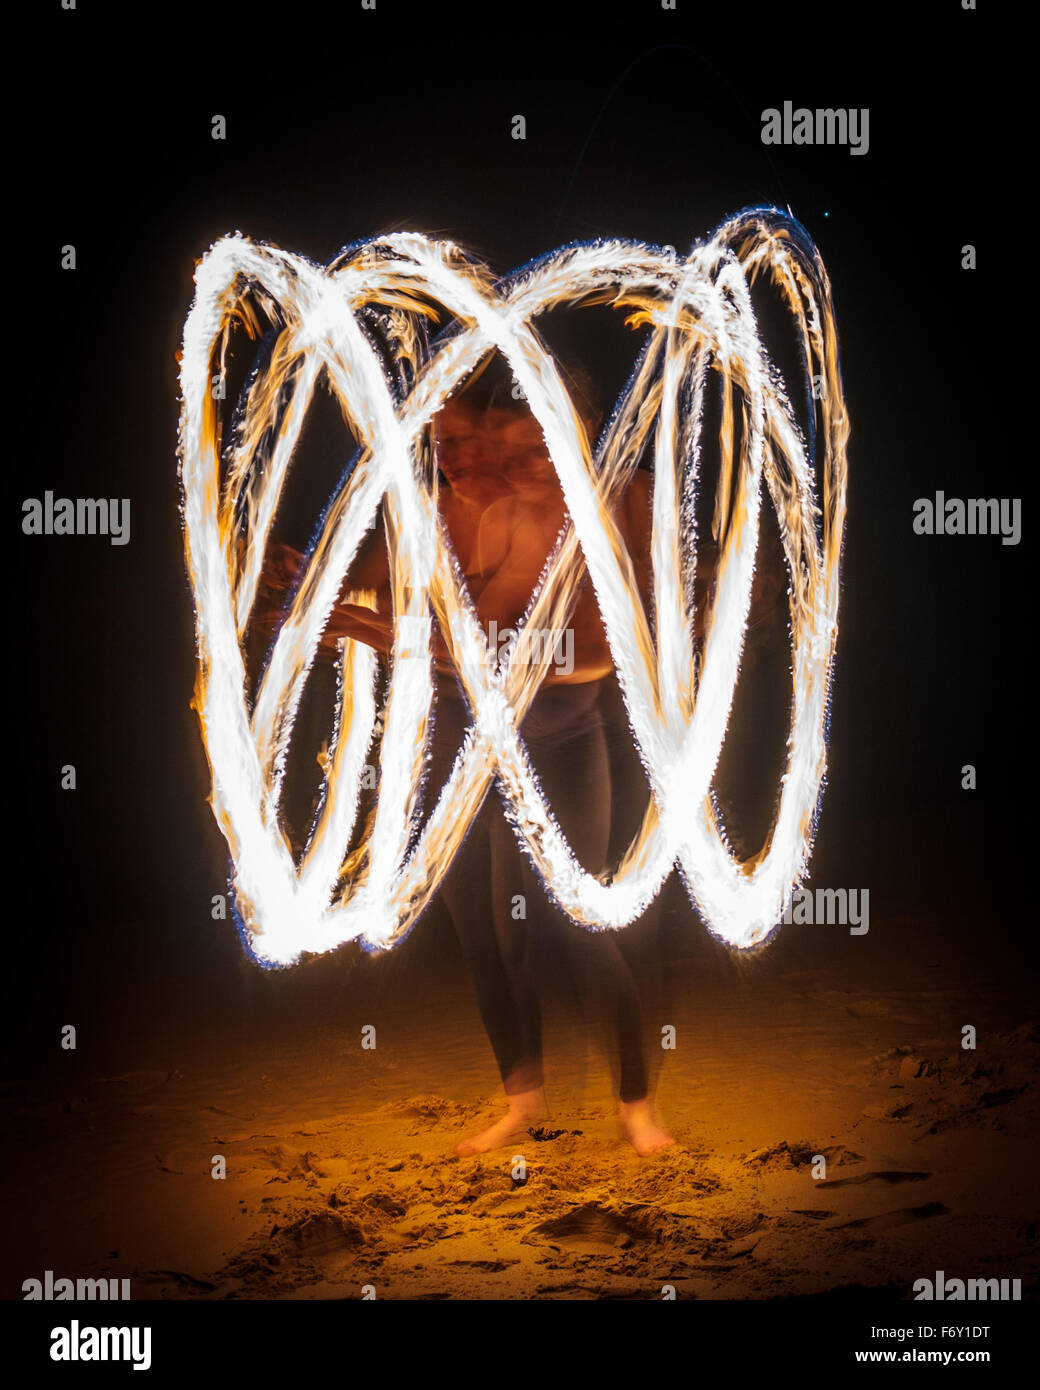 Fire twirling or 'fire poi' performance Stock Photo